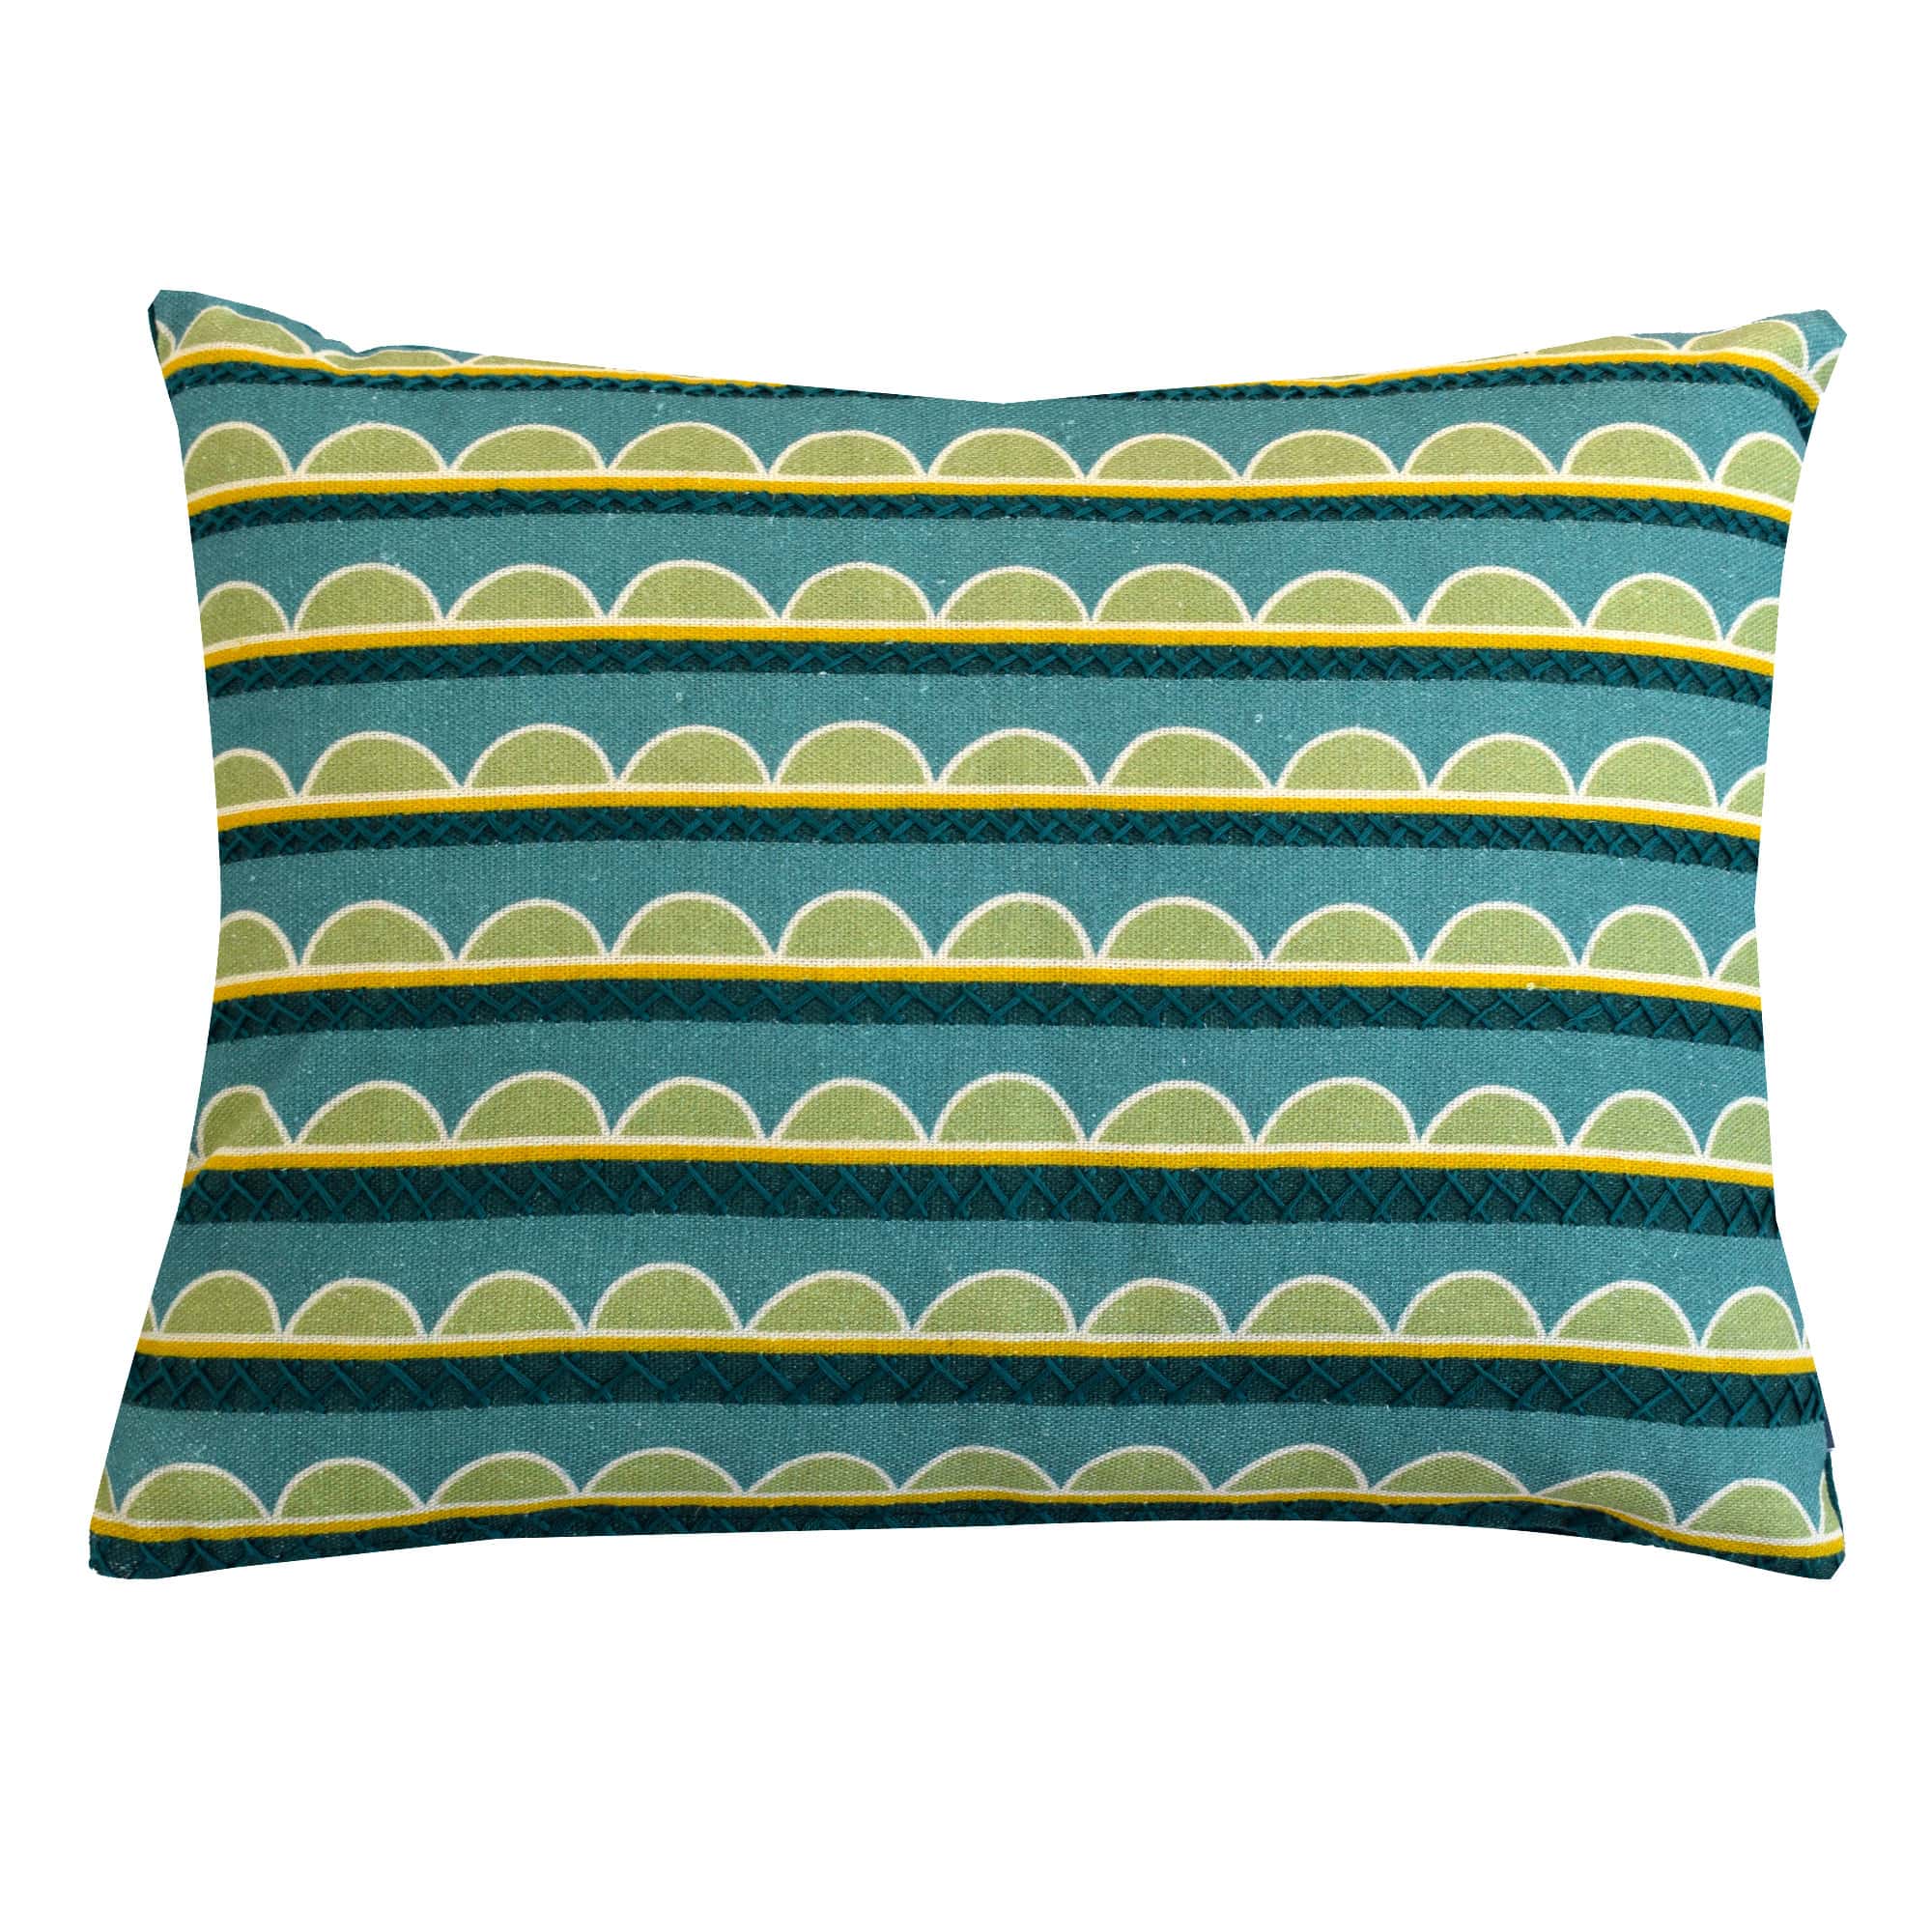 Joy of Print Ric Rac Scallop Embroidered Cushion Teal